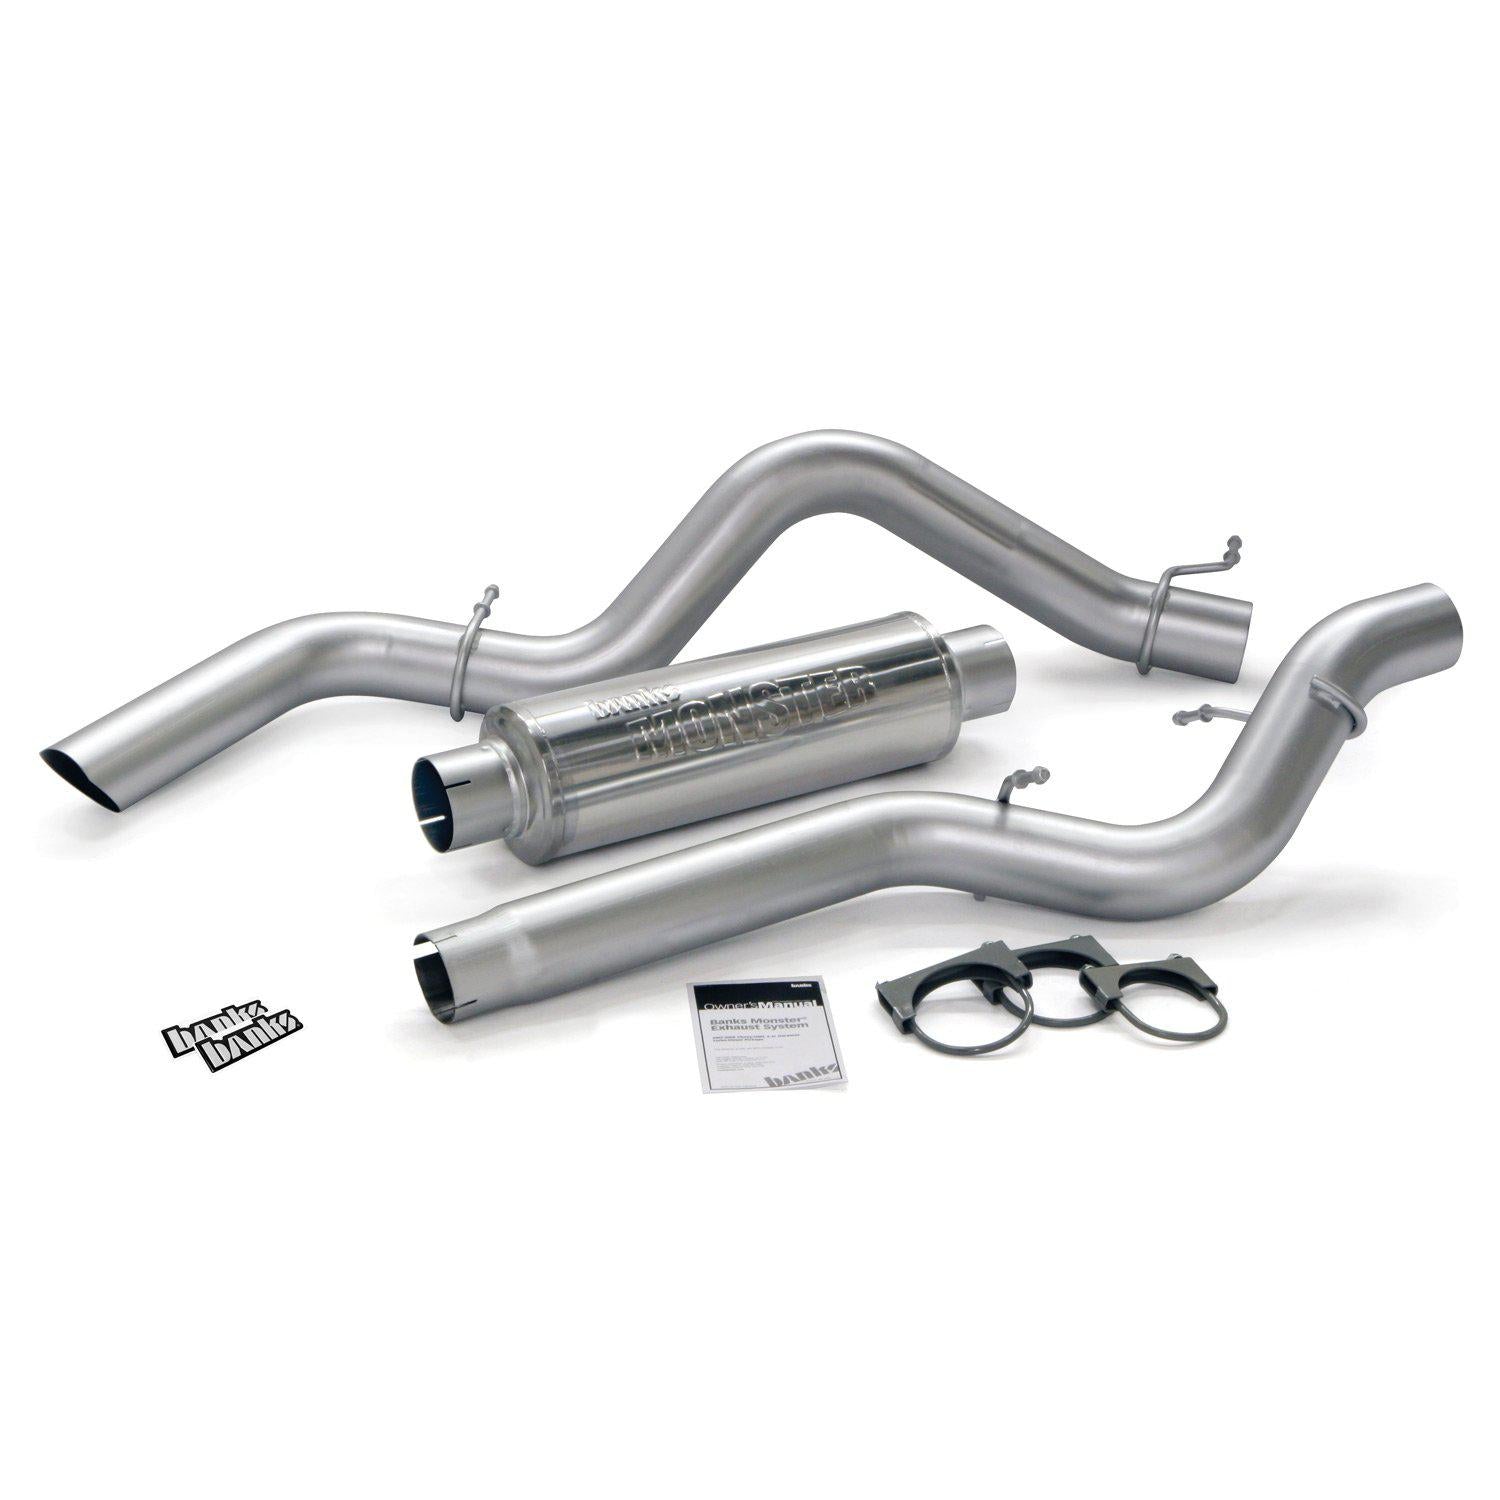 2006-2007 Duramax Exhaust System Kit - ECSB (48773)-Exhaust System Kit-Banks Power-48773-Dirty Diesel Customs